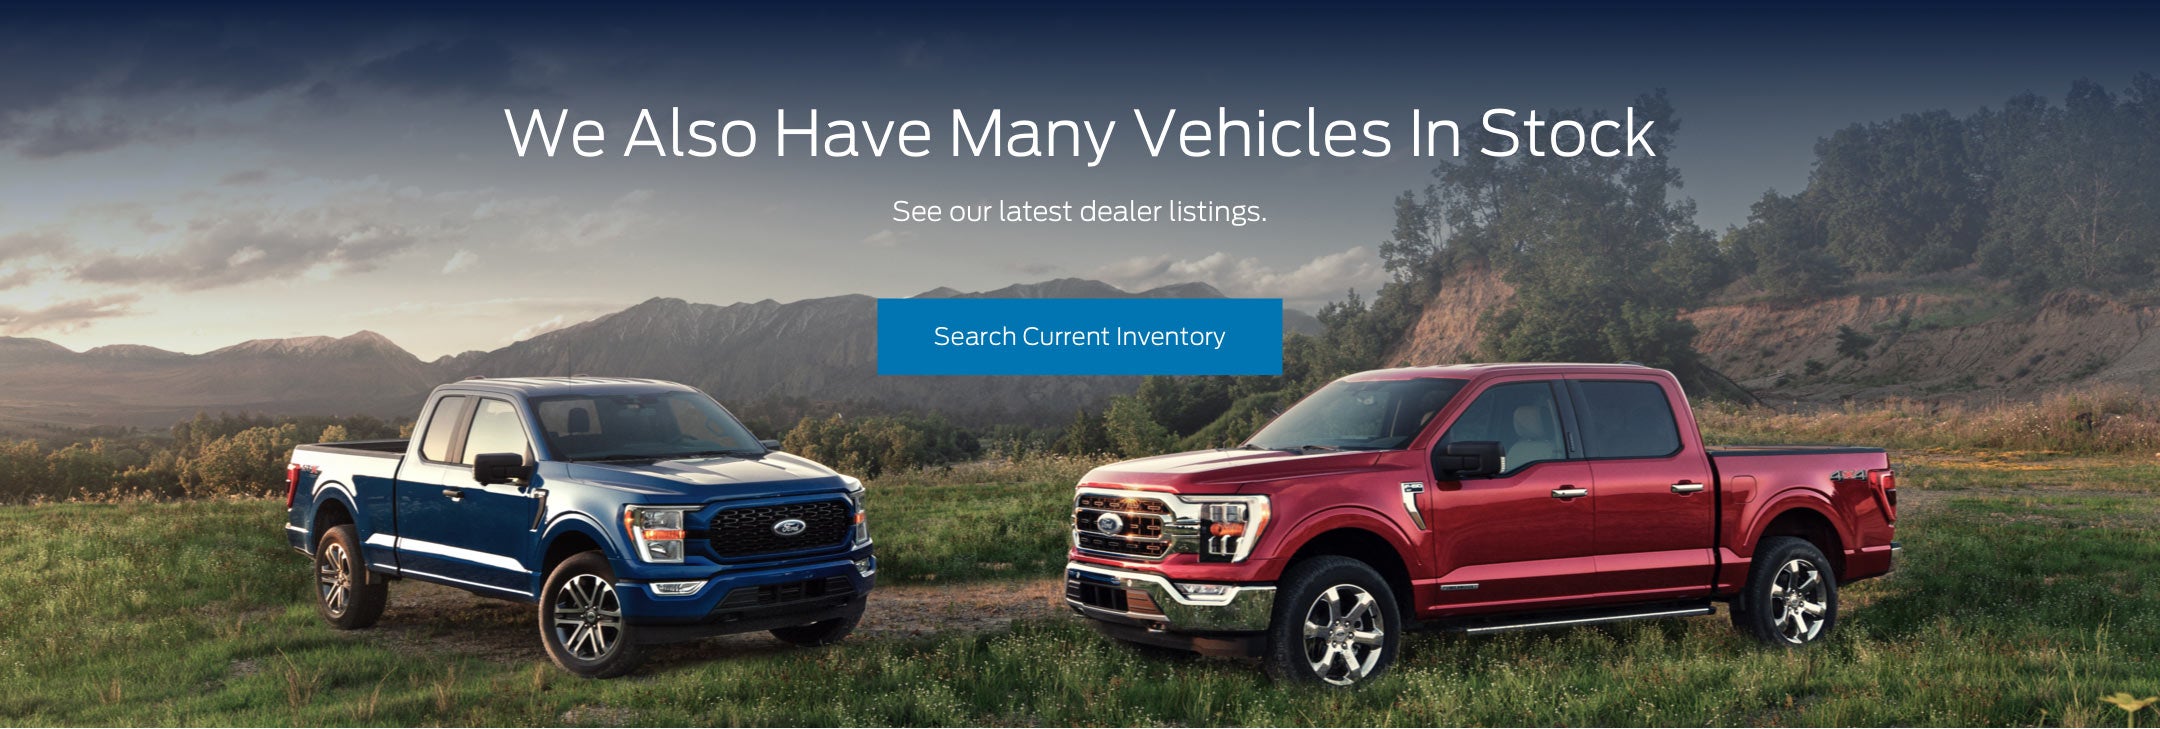 Ford vehicles in stock | McRee Ford, Inc. in Dickinson TX